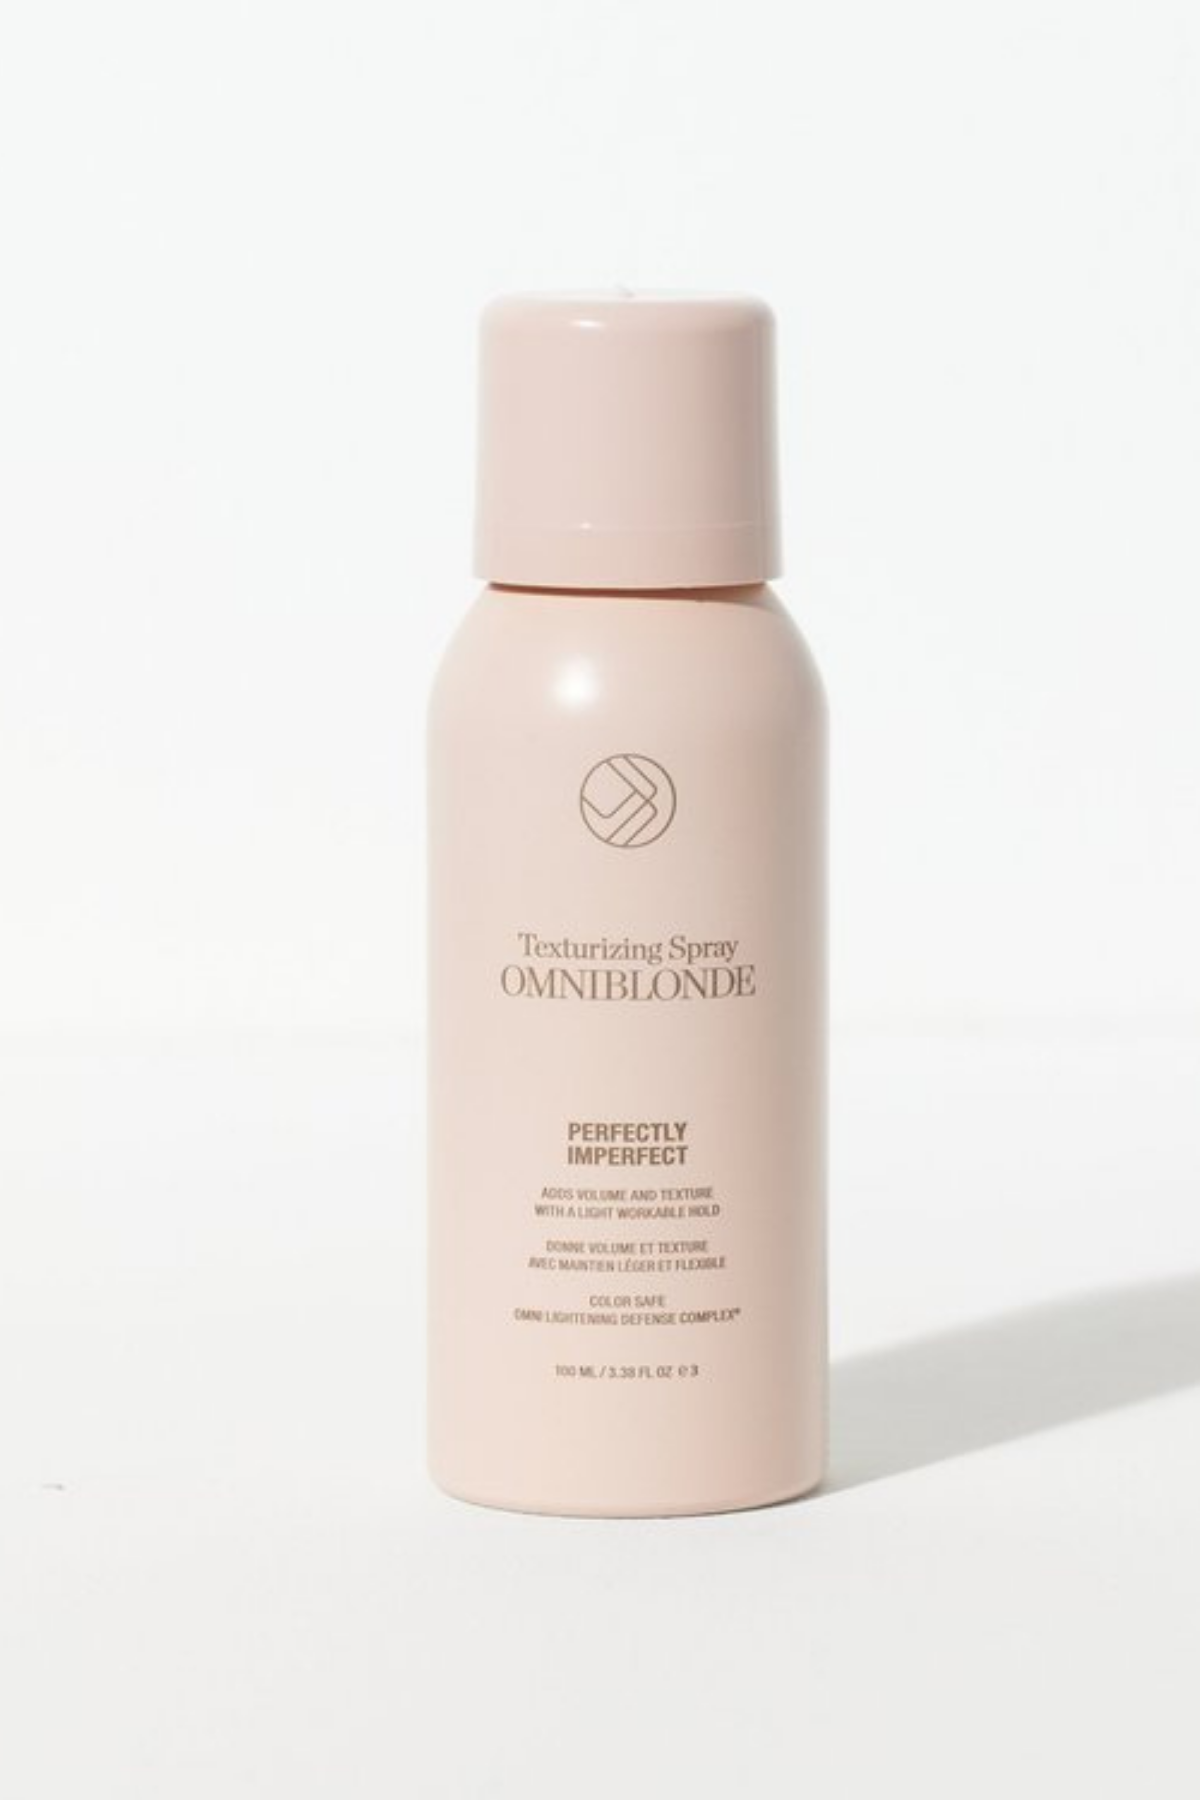 Omniblonde Texturizing Spray- Perfectly imperfect